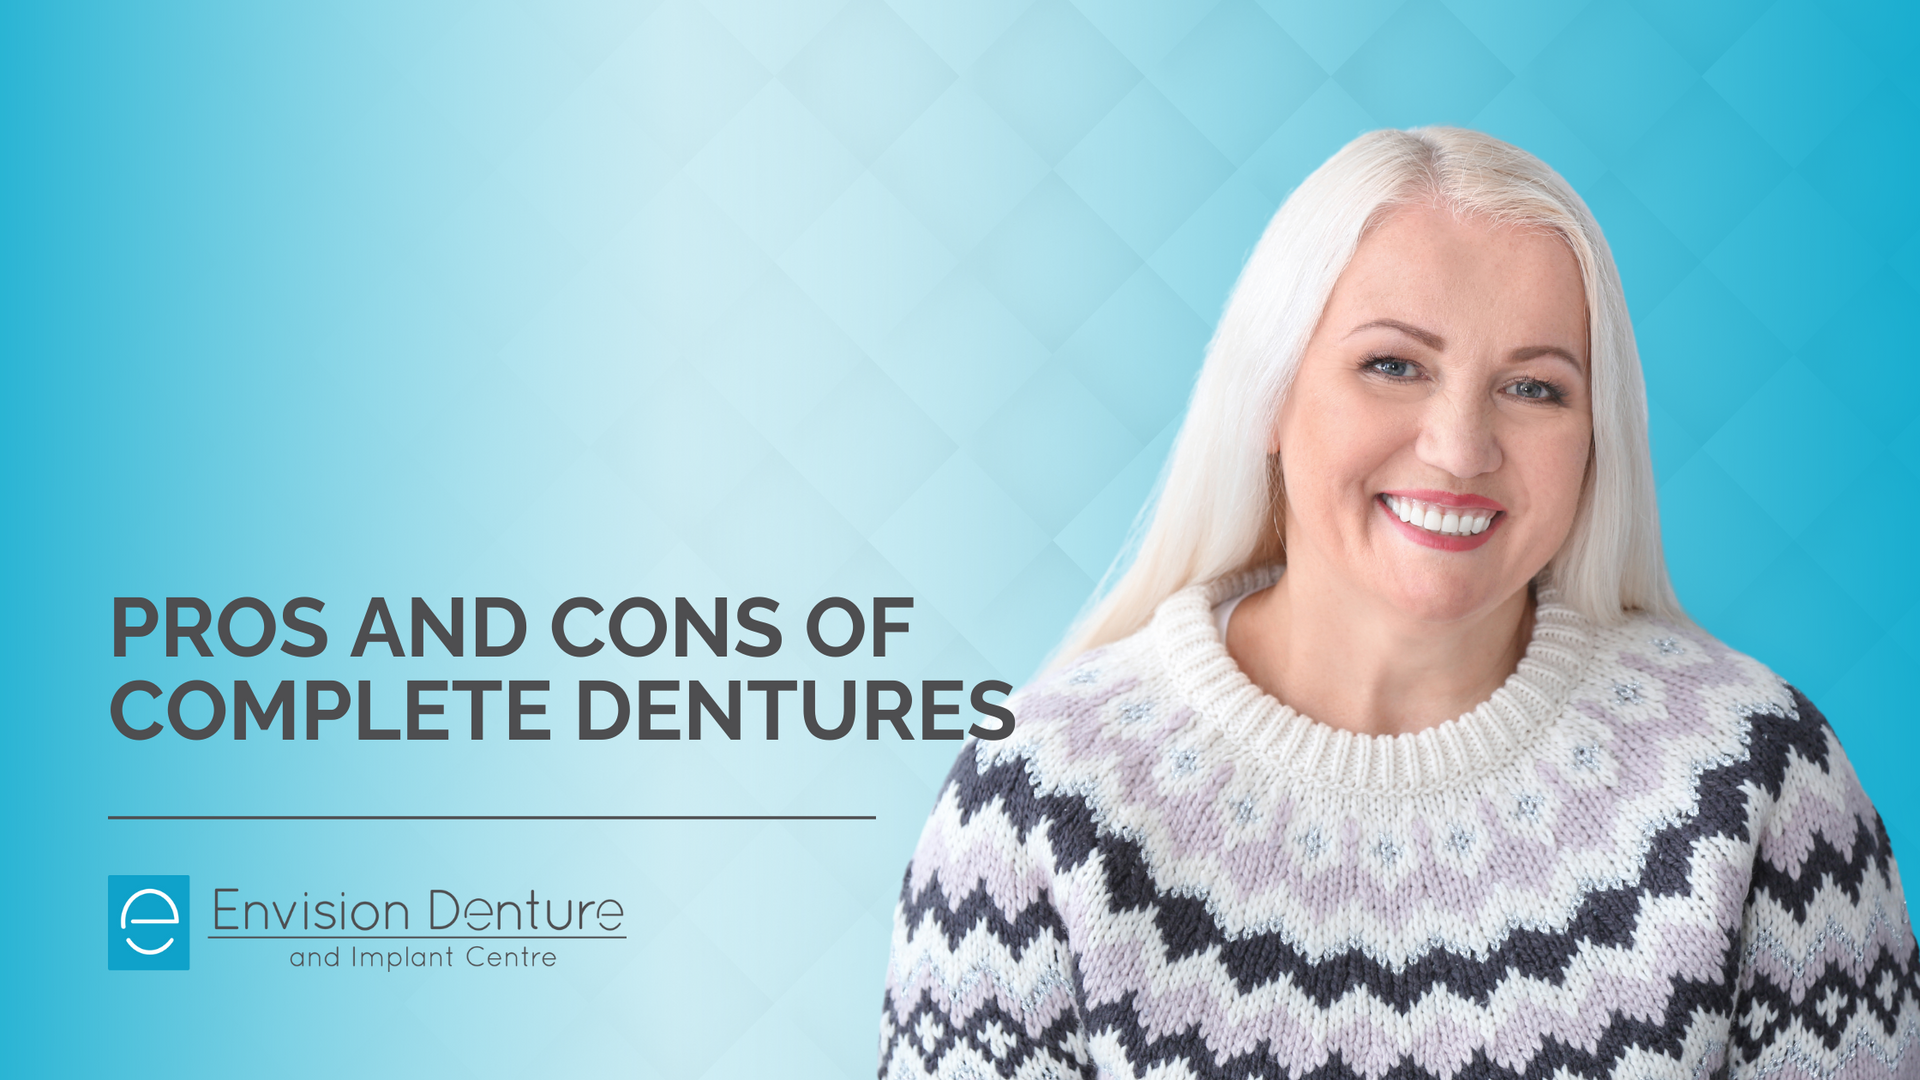 A woman in a sweater is smiling and talking about the pros and cons of complete dentures.